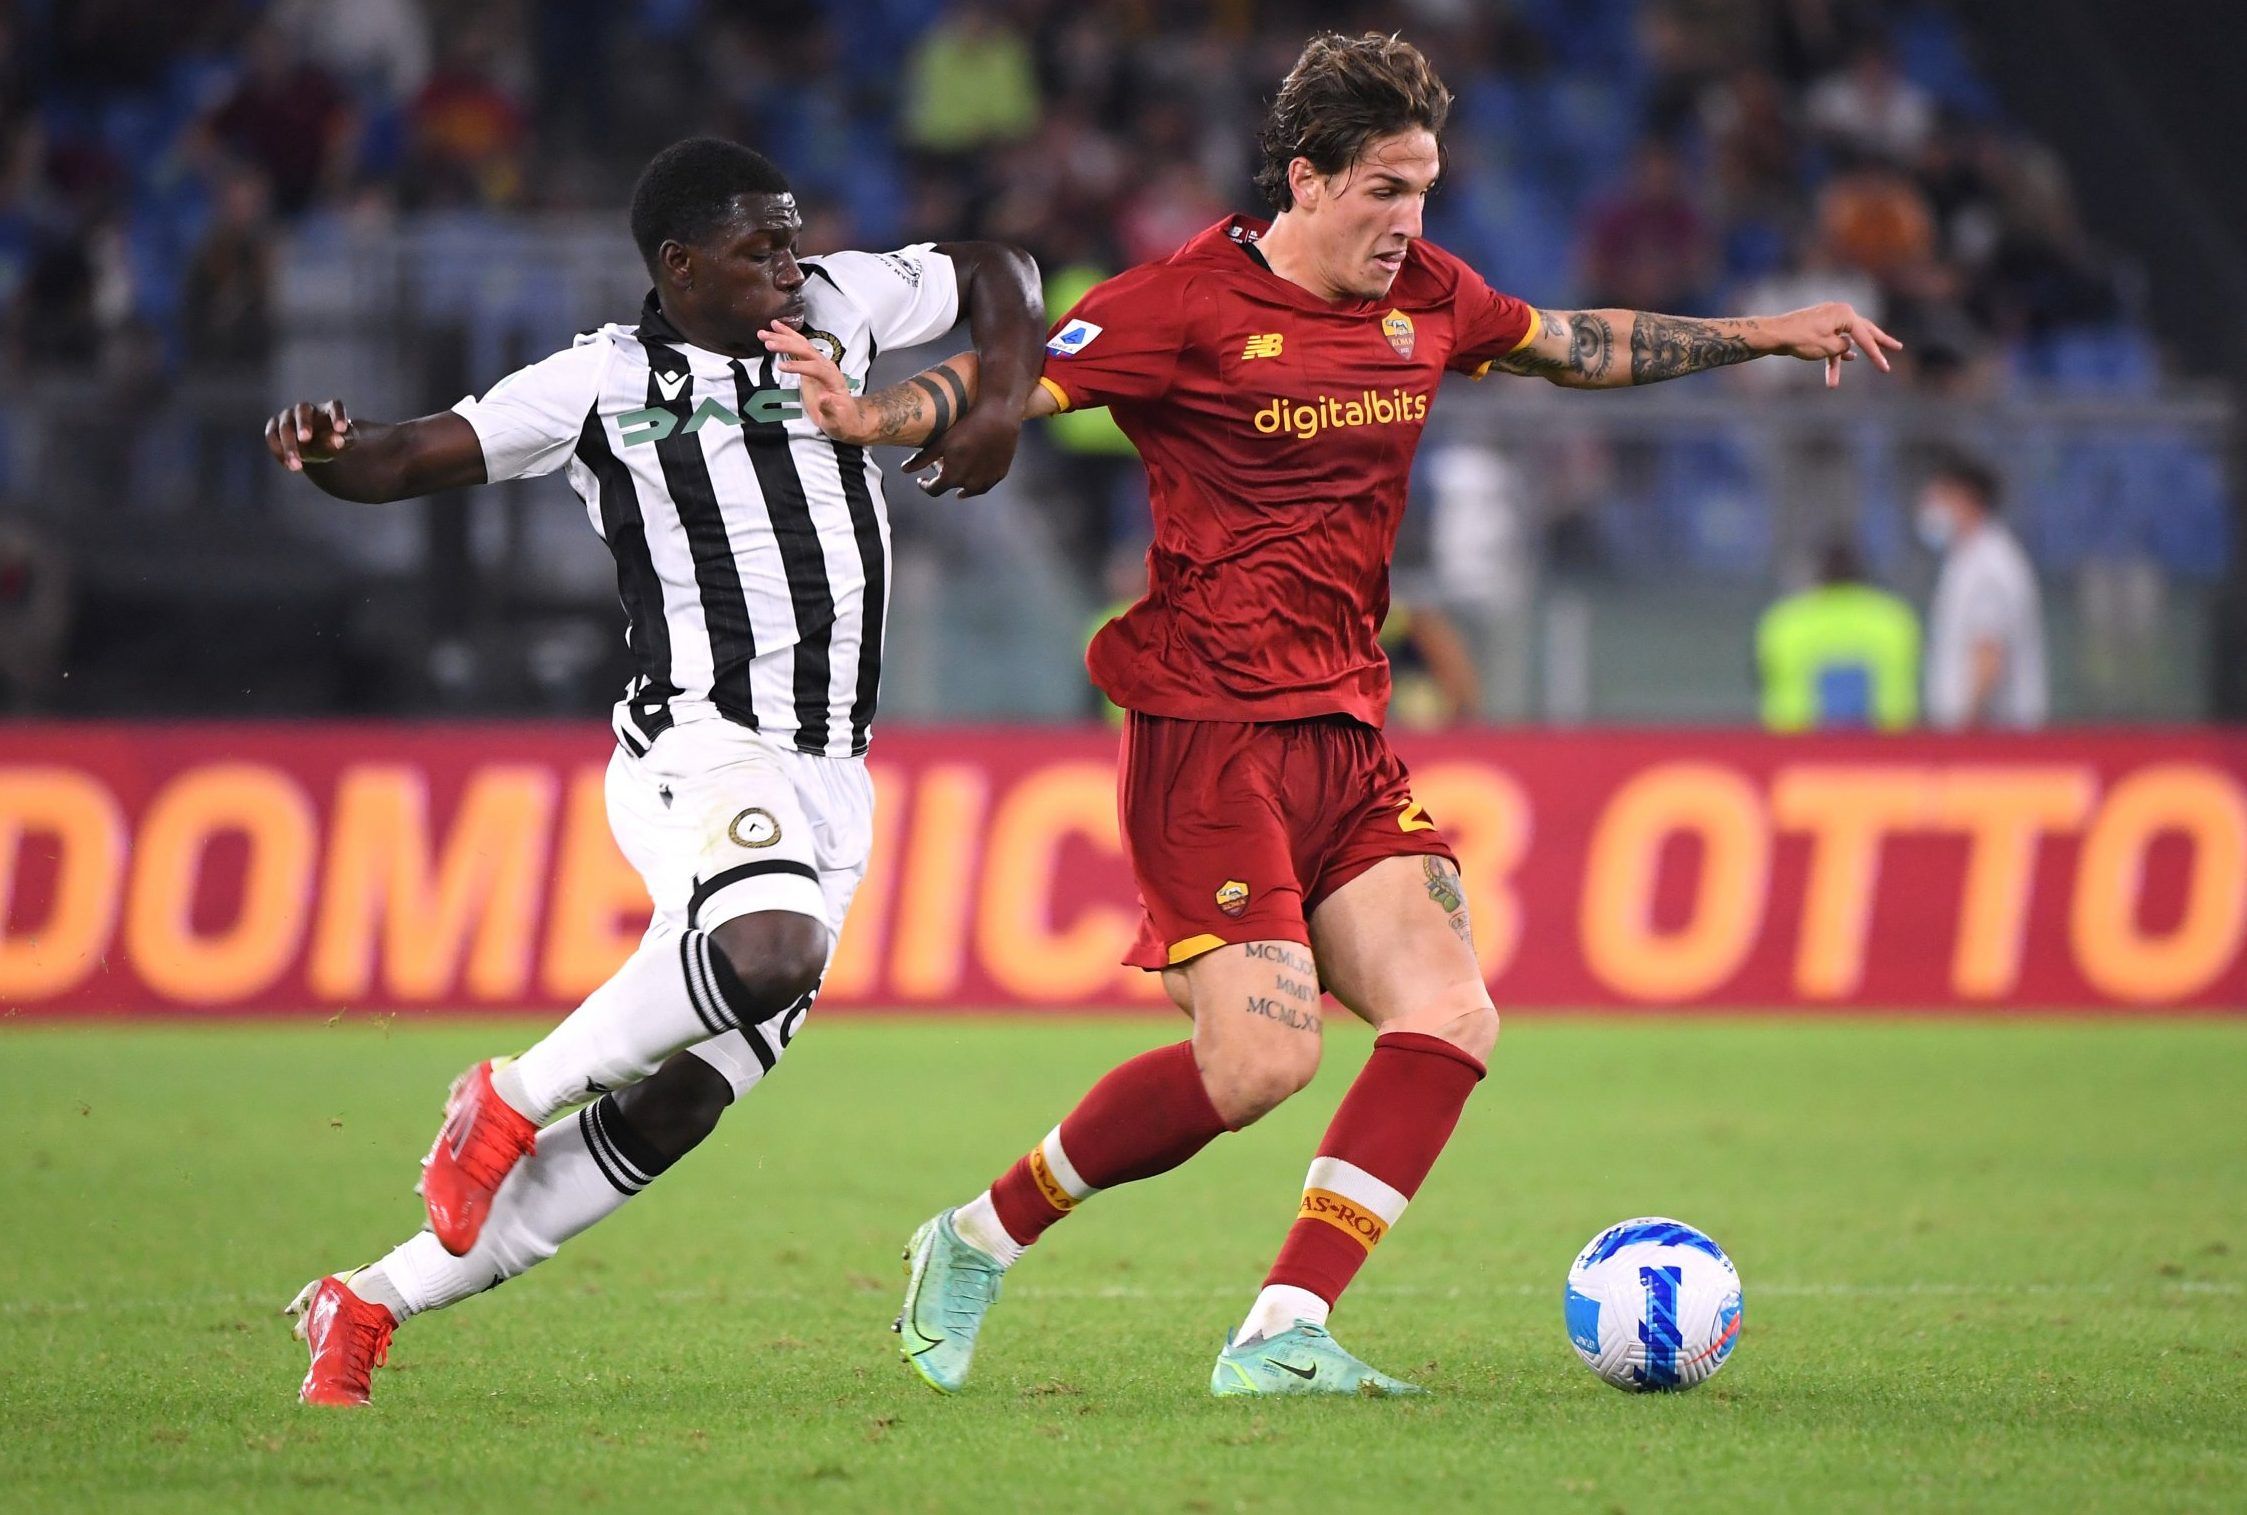 AS Roma midfielder Nicolo Zaniolo in action against Udinese in Serie A